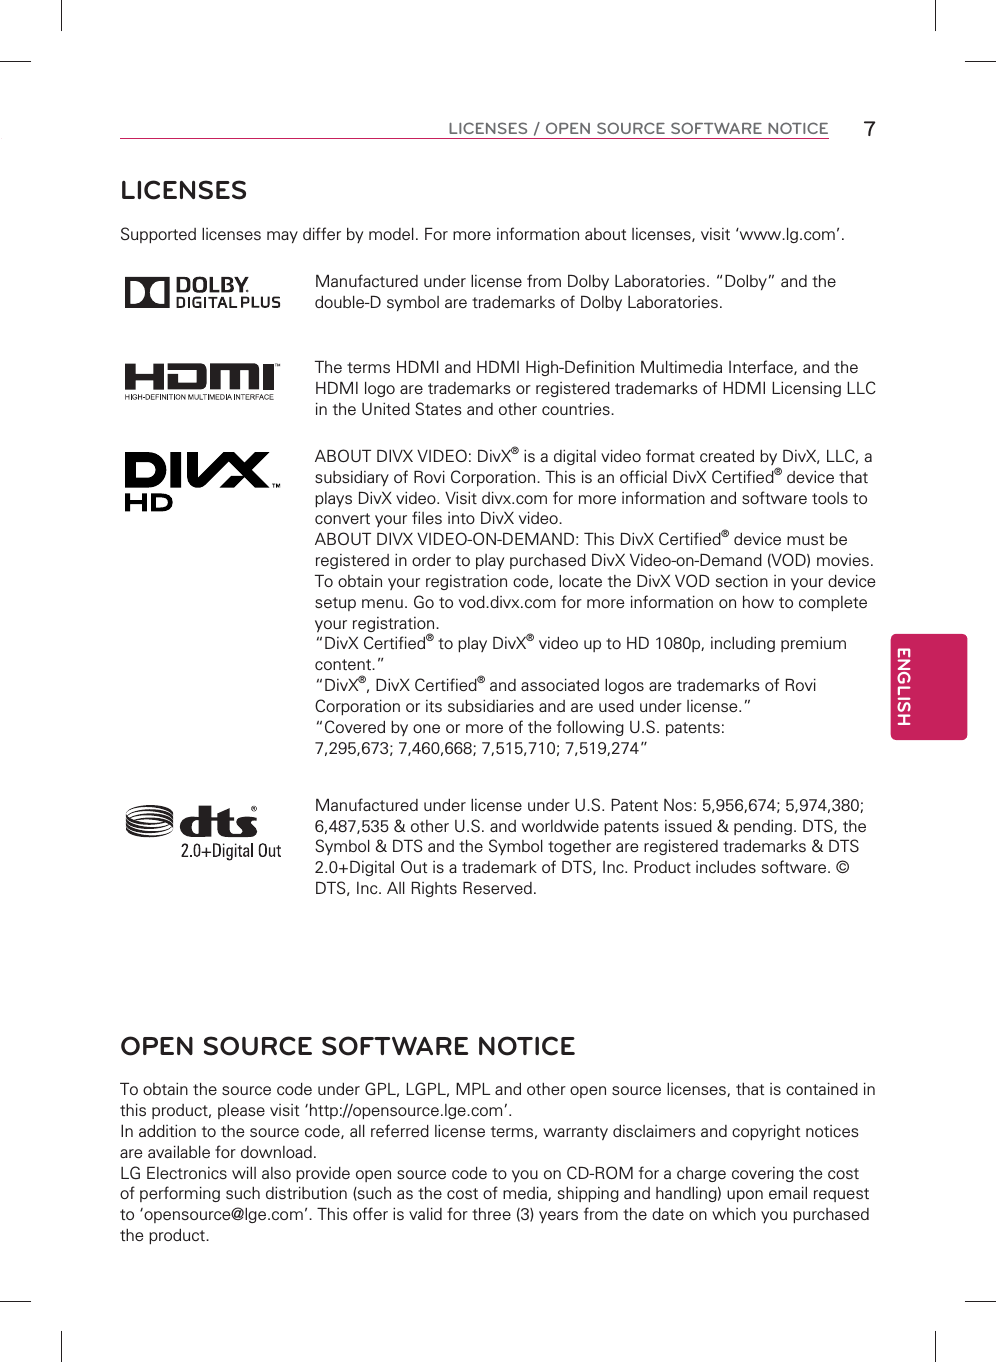 ENGLISH7LICENSES / OPEN SOURCE SOFTWARE NOTICE LICENSESSupported licenses may differ by model. For more information about licenses, visit ‘www.lg.com’.Manufactured under license from Dolby Laboratories. “Dolby” and the double-D symbol are trademarks of Dolby Laboratories.The terms HDMI and HDMI High-Definition Multimedia Interface, and the HDMI logo are trademarks or registered trademarks of HDMI Licensing LLC in the United States and other countries.ABOUT DIVX VIDEO: DivX® is a digital video format created by DivX, LLC, a subsidiary of Rovi Corporation. This is an official DivX Certified® device that plays DivX video. Visit divx.com for more information and software tools to convert your files into DivX video.ABOUT DIVX VIDEO-ON-DEMAND: This DivX Certified® device must be registered in order to play purchased DivX Video-on-Demand (VOD) movies. To obtain your registration code, locate the DivX VOD section in your device setup menu. Go to vod.divx.com for more information on how to complete your registration. “DivX Certified® to play DivX® video up to HD 1080p, including premium content.”“DivX®, DivX Certified® and associated logos are trademarks of Rovi Corporation or its subsidiaries and are used under license.”“Covered by one or more of the following U.S. patents: 7,295,673; 7,460,668; 7,515,710; 7,519,274”Manufactured under license under U.S. Patent Nos: 5,956,674; 5,974,380; 6,487,535 &amp; other U.S. and worldwide patents issued &amp; pending. DTS, the Symbol &amp; DTS and the Symbol together are registered trademarks &amp; DTS 2.0+Digital Out is a trademark of DTS, Inc. Product includes software. © DTS, Inc. All Rights Reserved.OPEN SOURCE SOFTWARE NOTICETo obtain the source code under GPL, LGPL, MPL and other open source licenses, that is contained in this product, please visit ‘http://opensource.lge.com’.In addition to the source code, all referred license terms, warranty disclaimers and copyright notices are available for download.LG Electronics will also provide open source code to you on CD-ROM for a charge covering the cost of performing such distribution (such as the cost of media, shipping and handling) upon email request to ‘opensource@lge.com’. This offer is valid for three (3) years from the date on which you purchased the product.